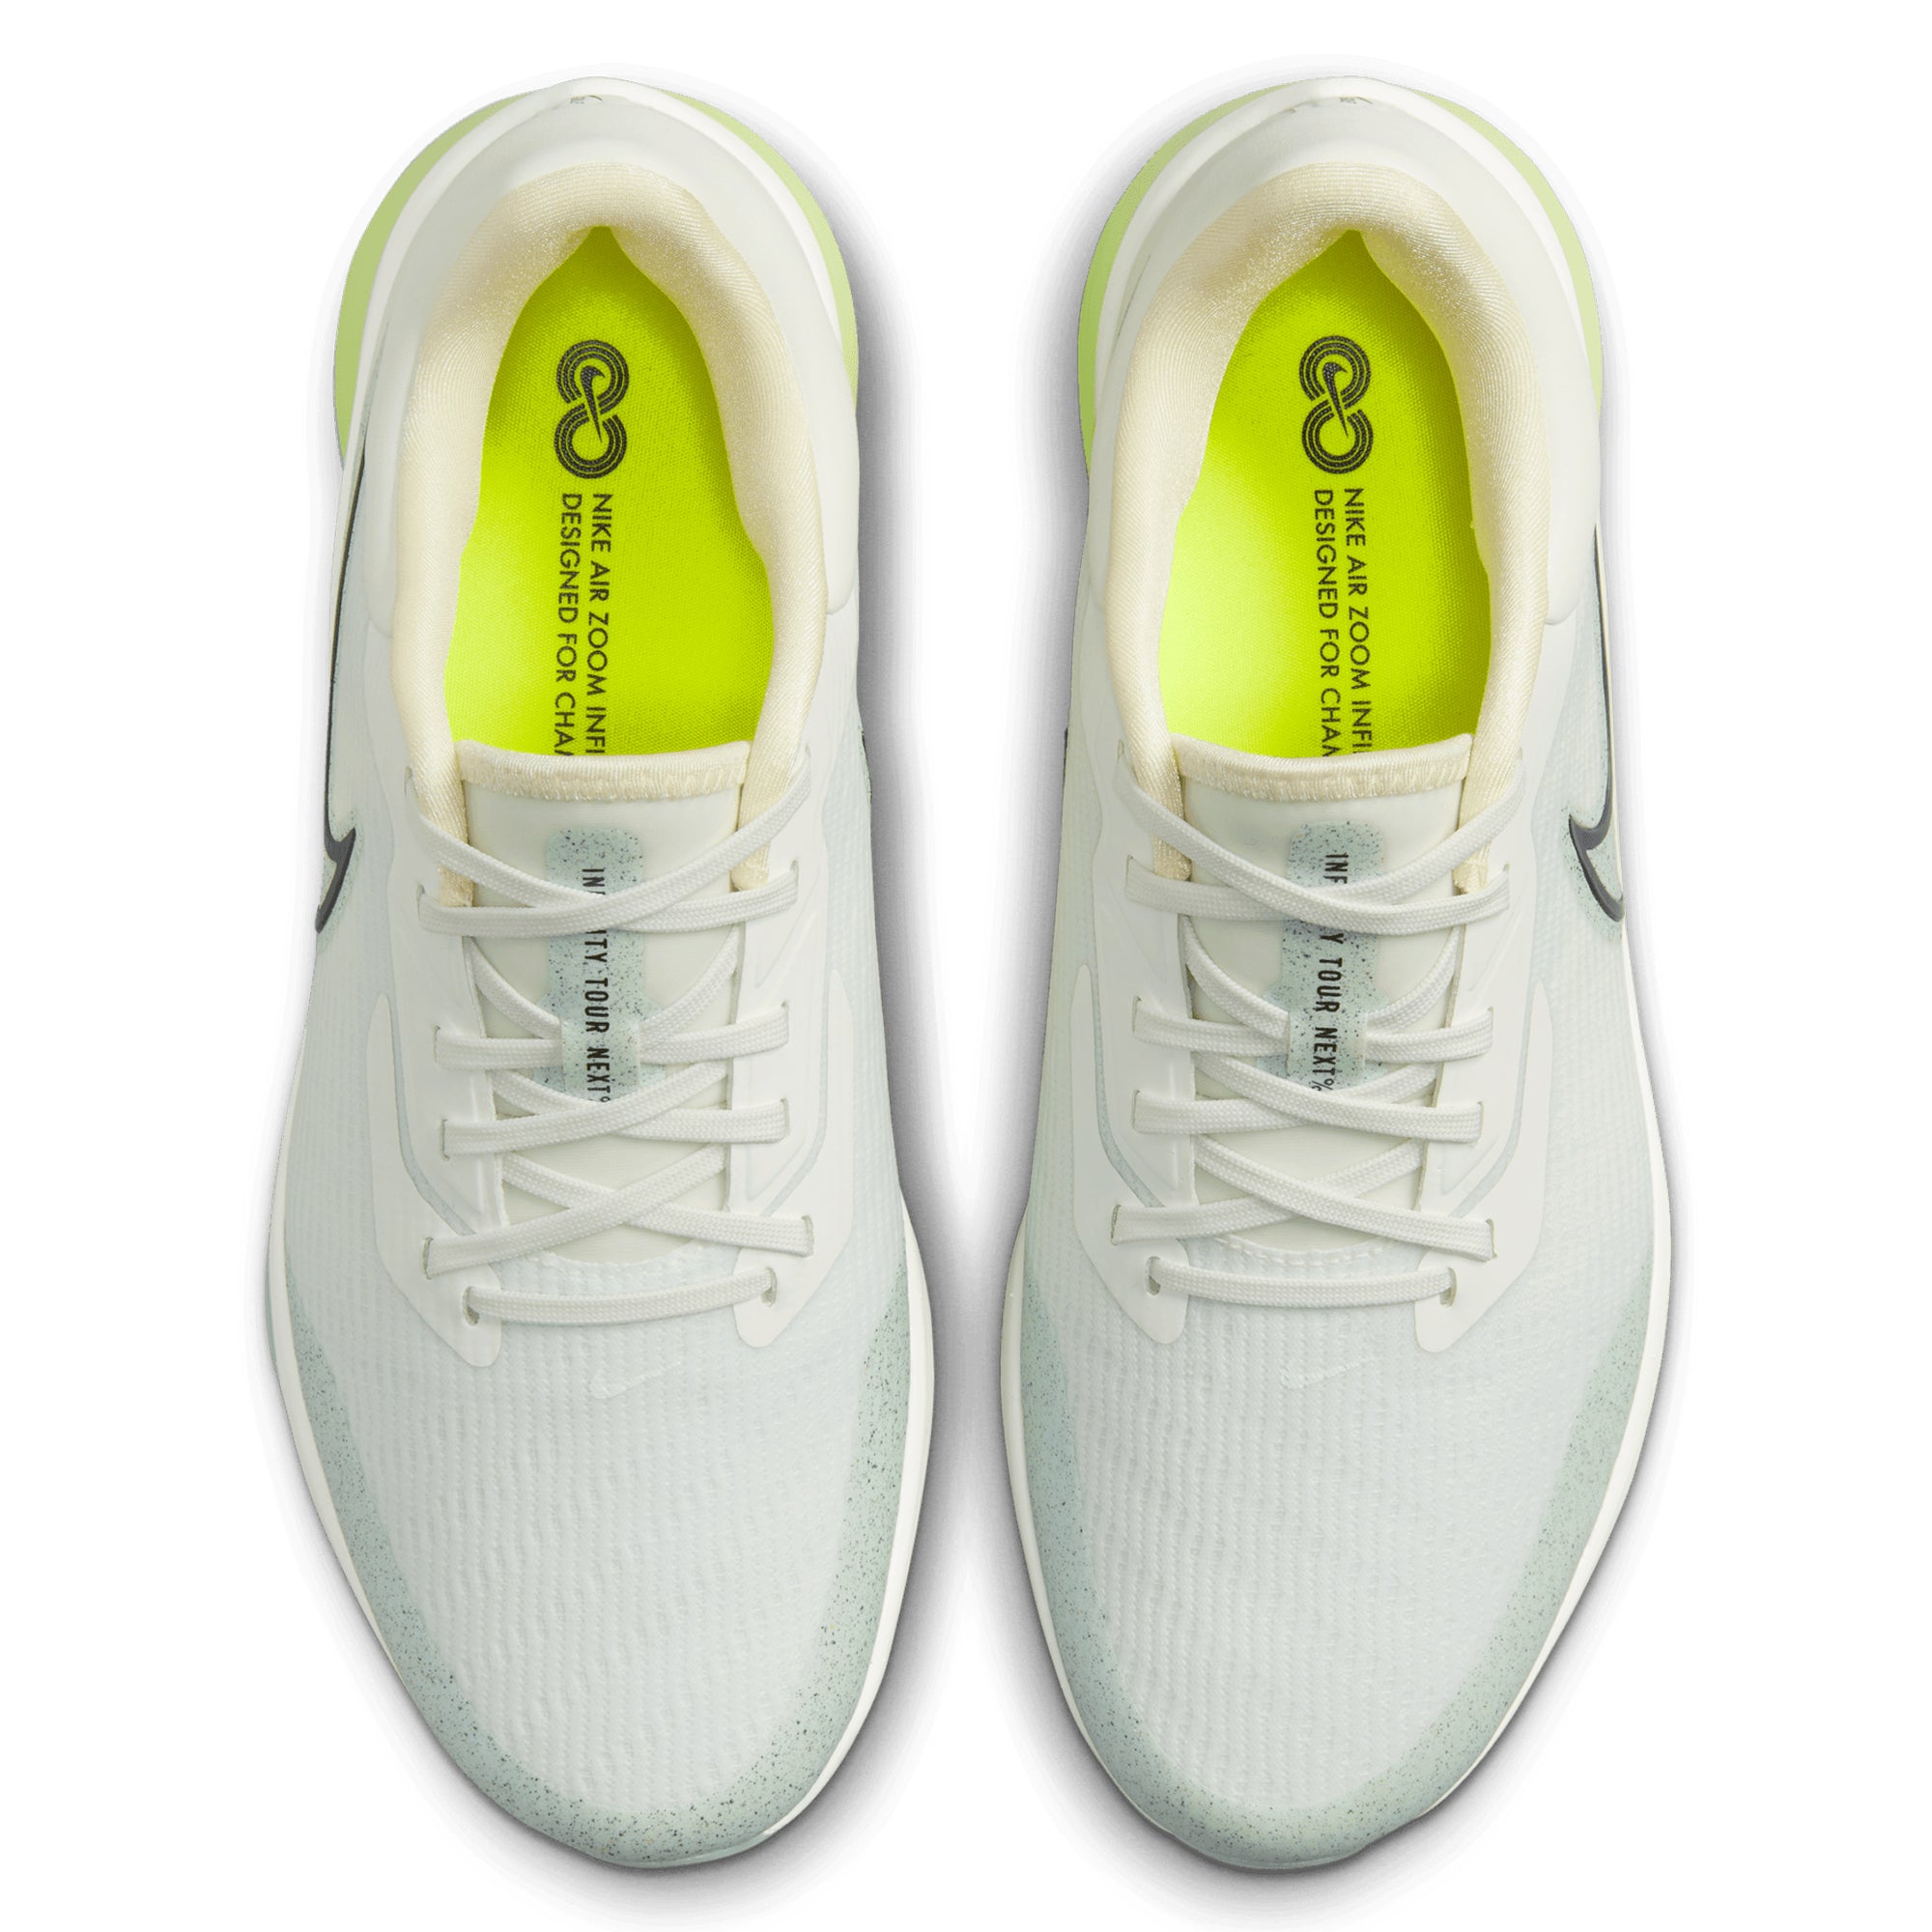 Nike Golf Air Zoom Infinity Tour NEXT% Shoes DC5221 Sail Barely Green ...